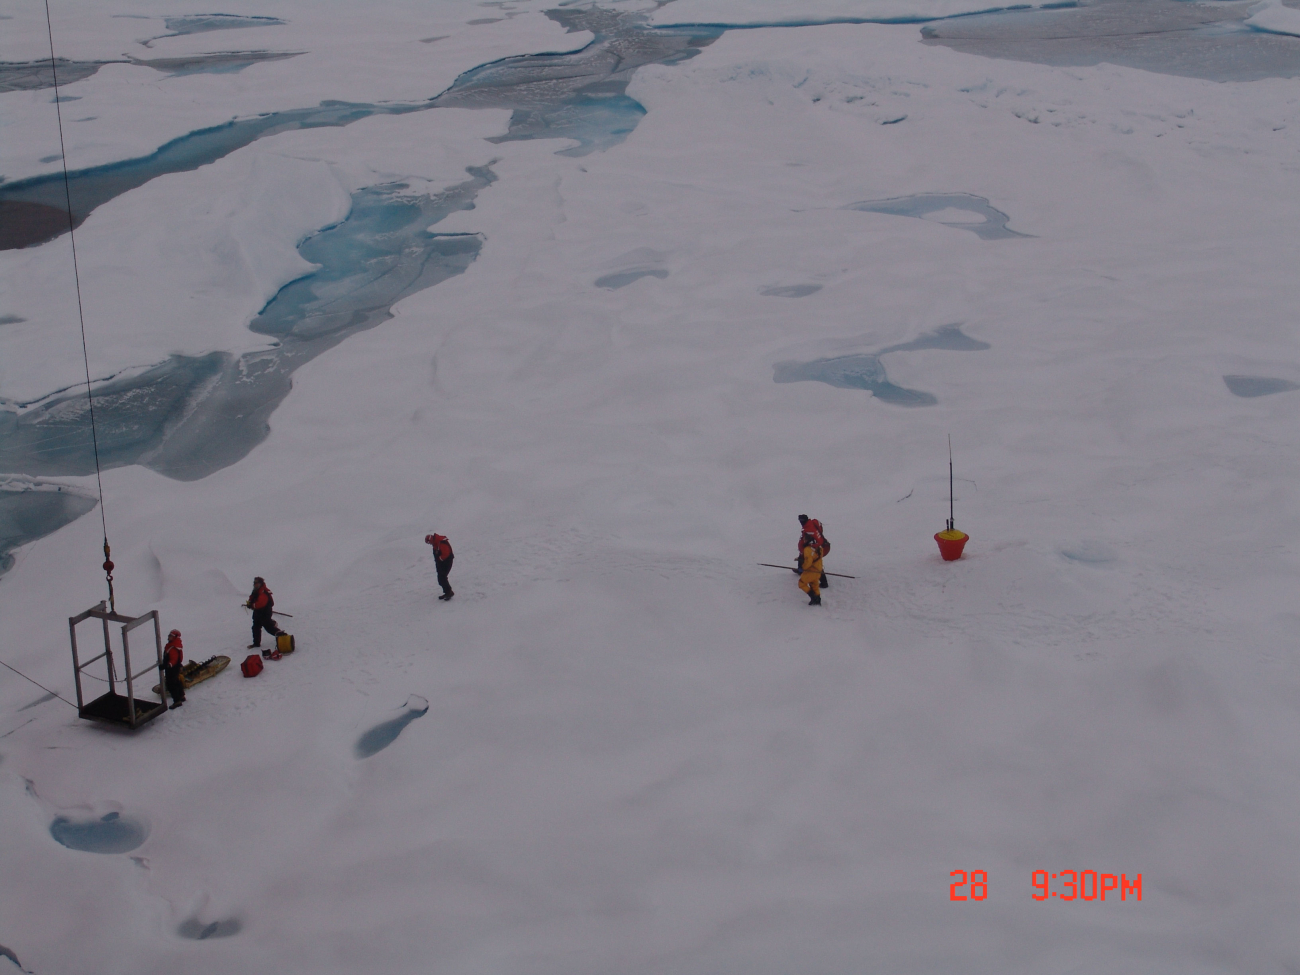 Returning to the CG Icebreaker HEALY after placing ice buoy in position